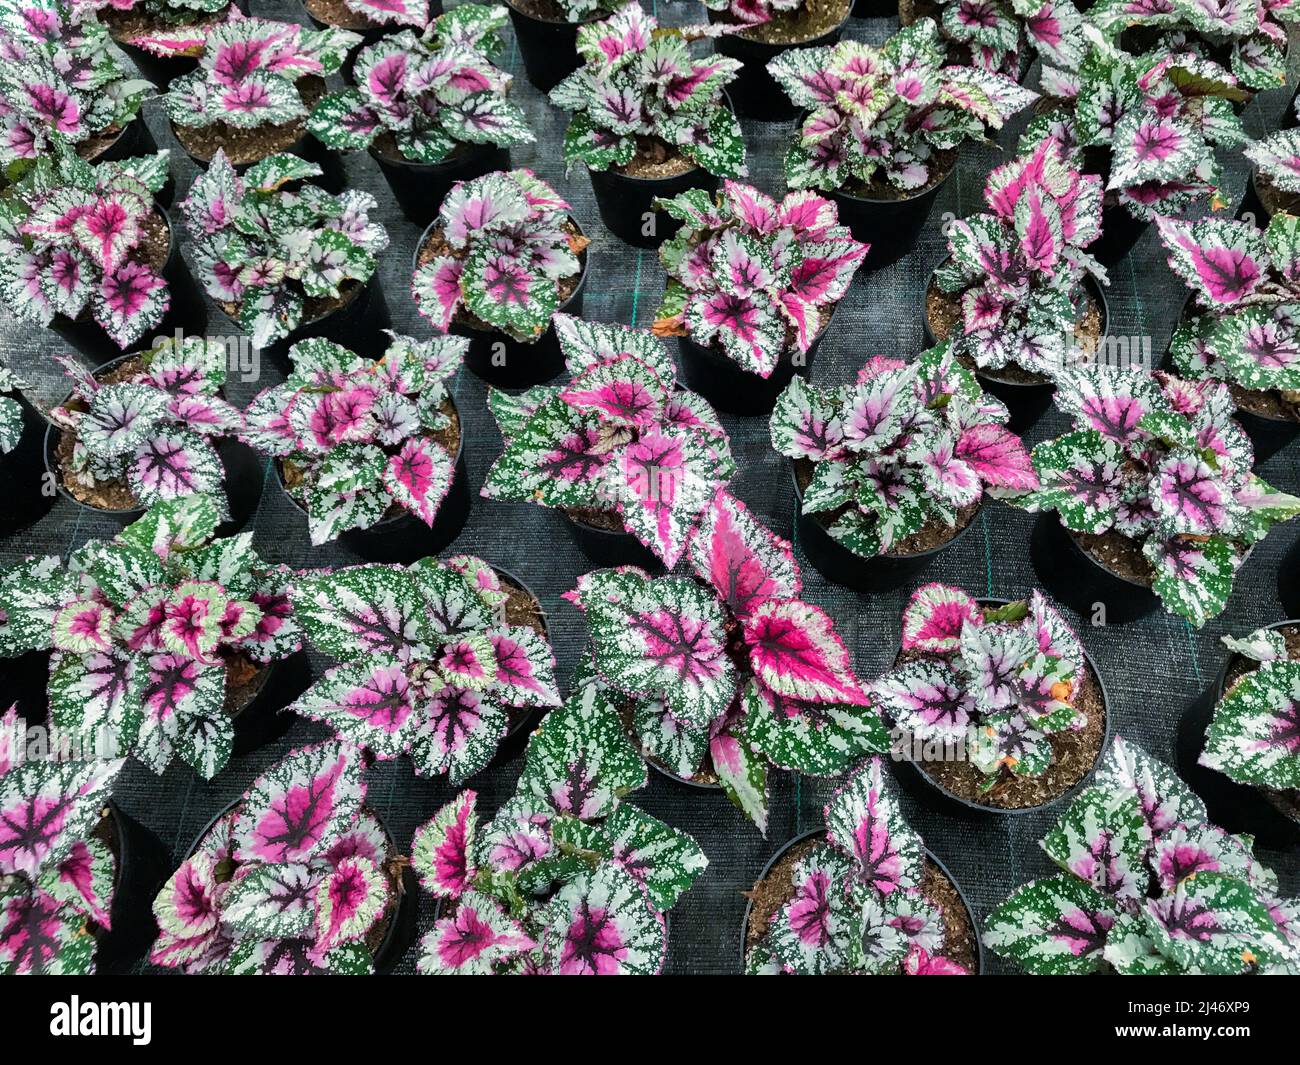 Top view of many begonia plants with dark pink variegated leaves in a flower pots. Stock Photo